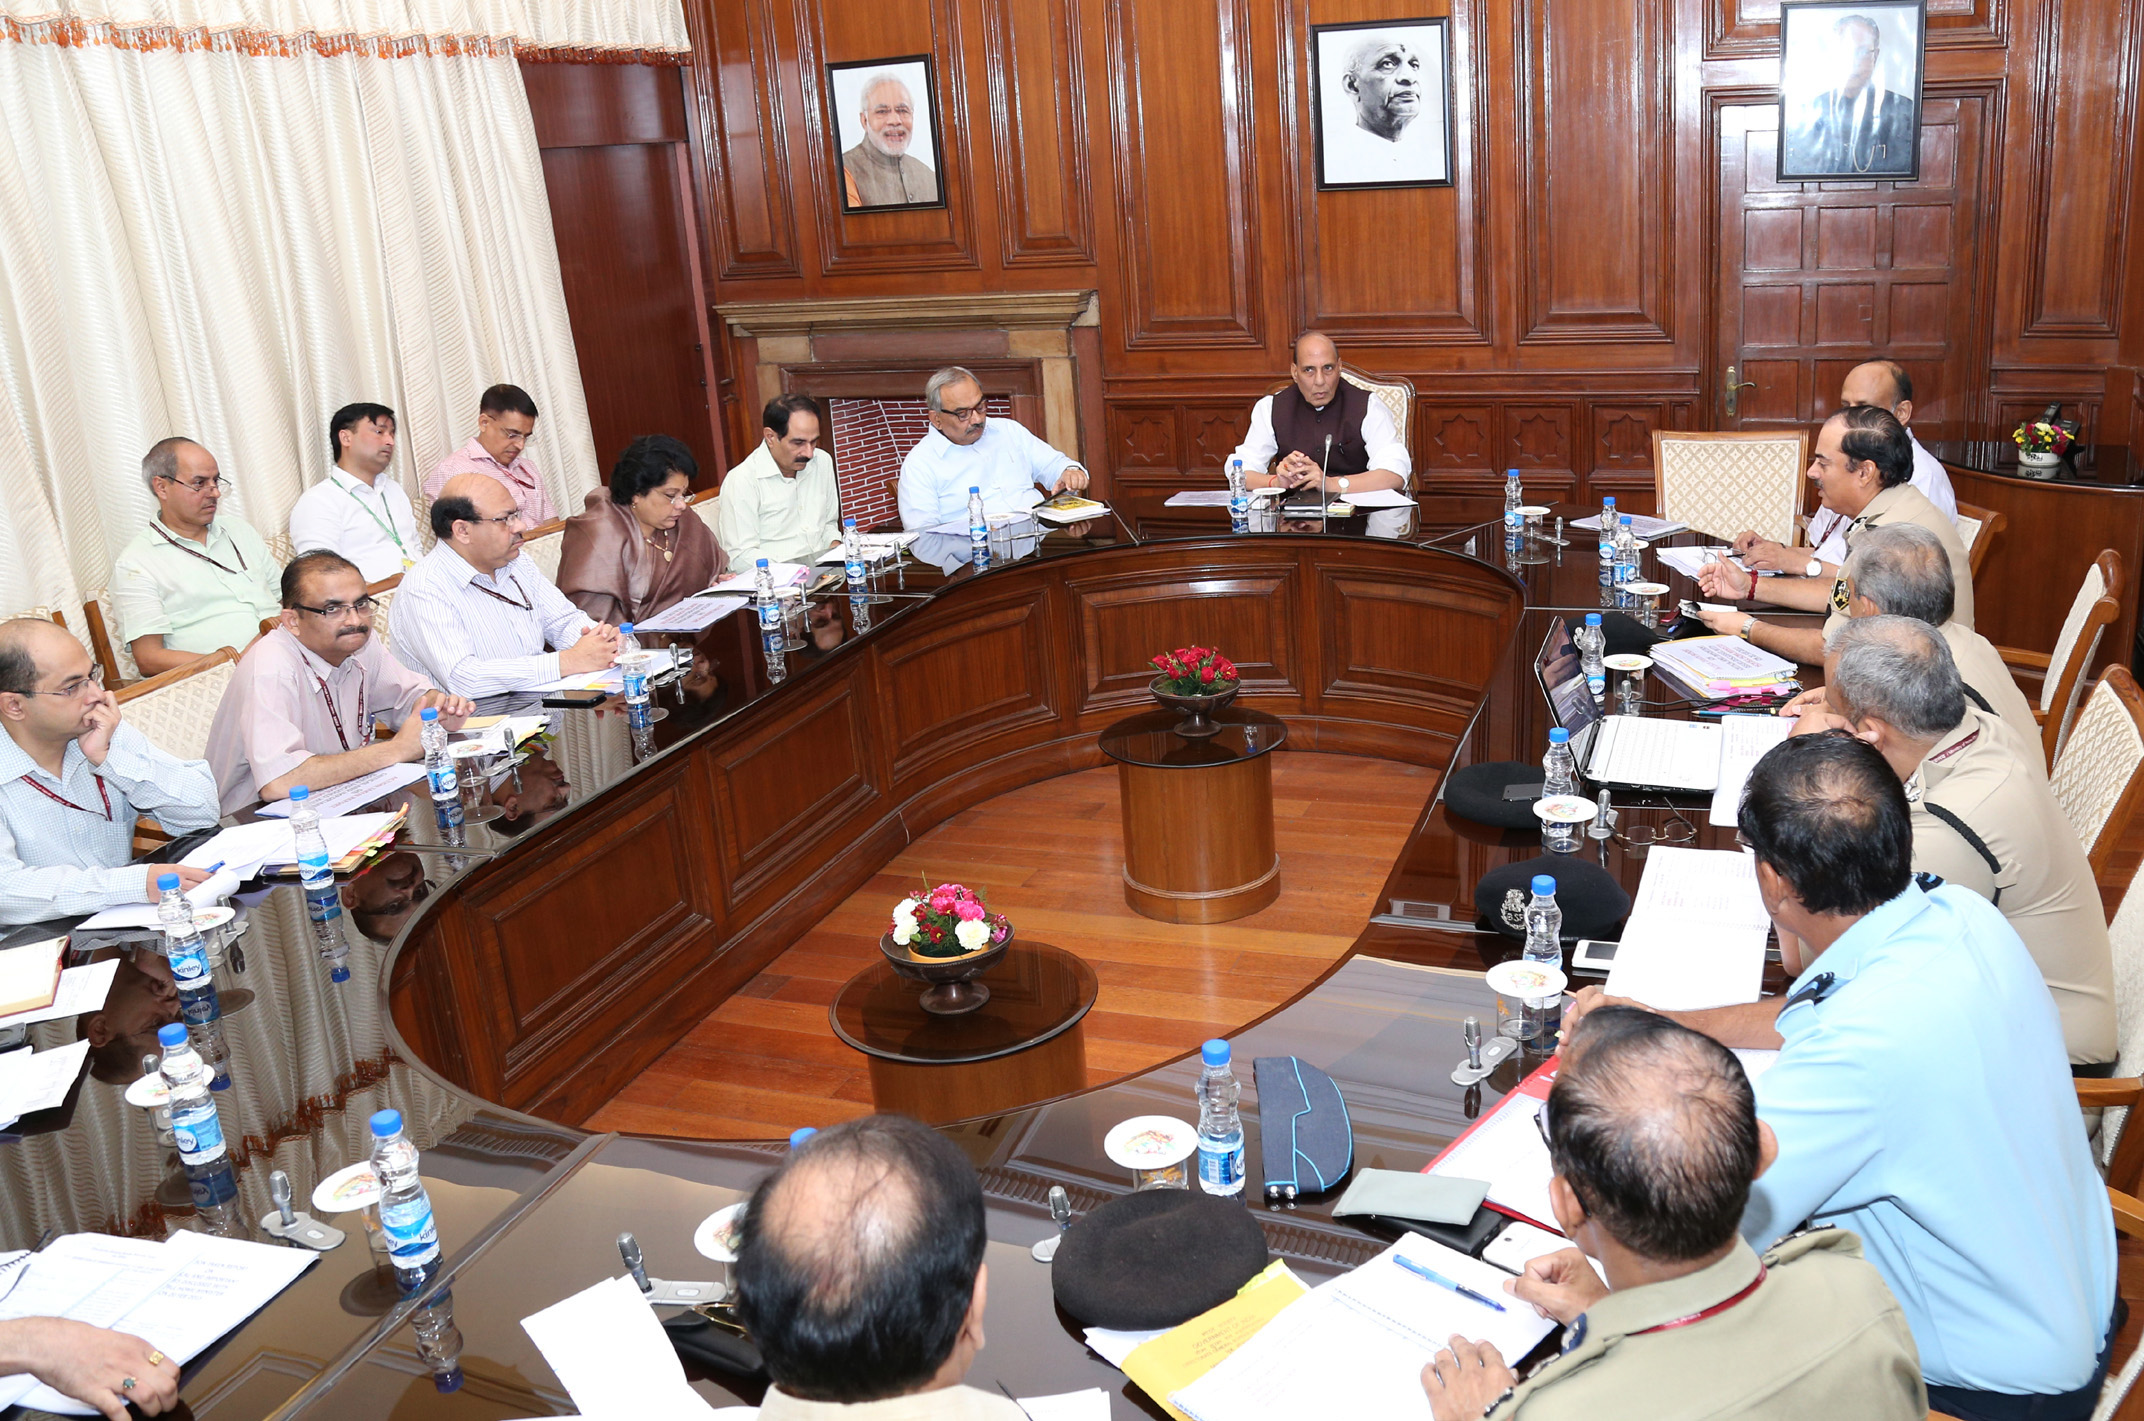 The Union Home Minister, Shri Rajnath Singh reviewing the working of the Border Security Force, in New Delhi on September 27, 2016. 	The Union Home Secretary, Shri Rajiv Mehrishi, the Director General, BSF, Shri K.K. Sharma and other senior officers of the Ministry of Home Affairs, the Ministry of Defence and BSF are also seen.